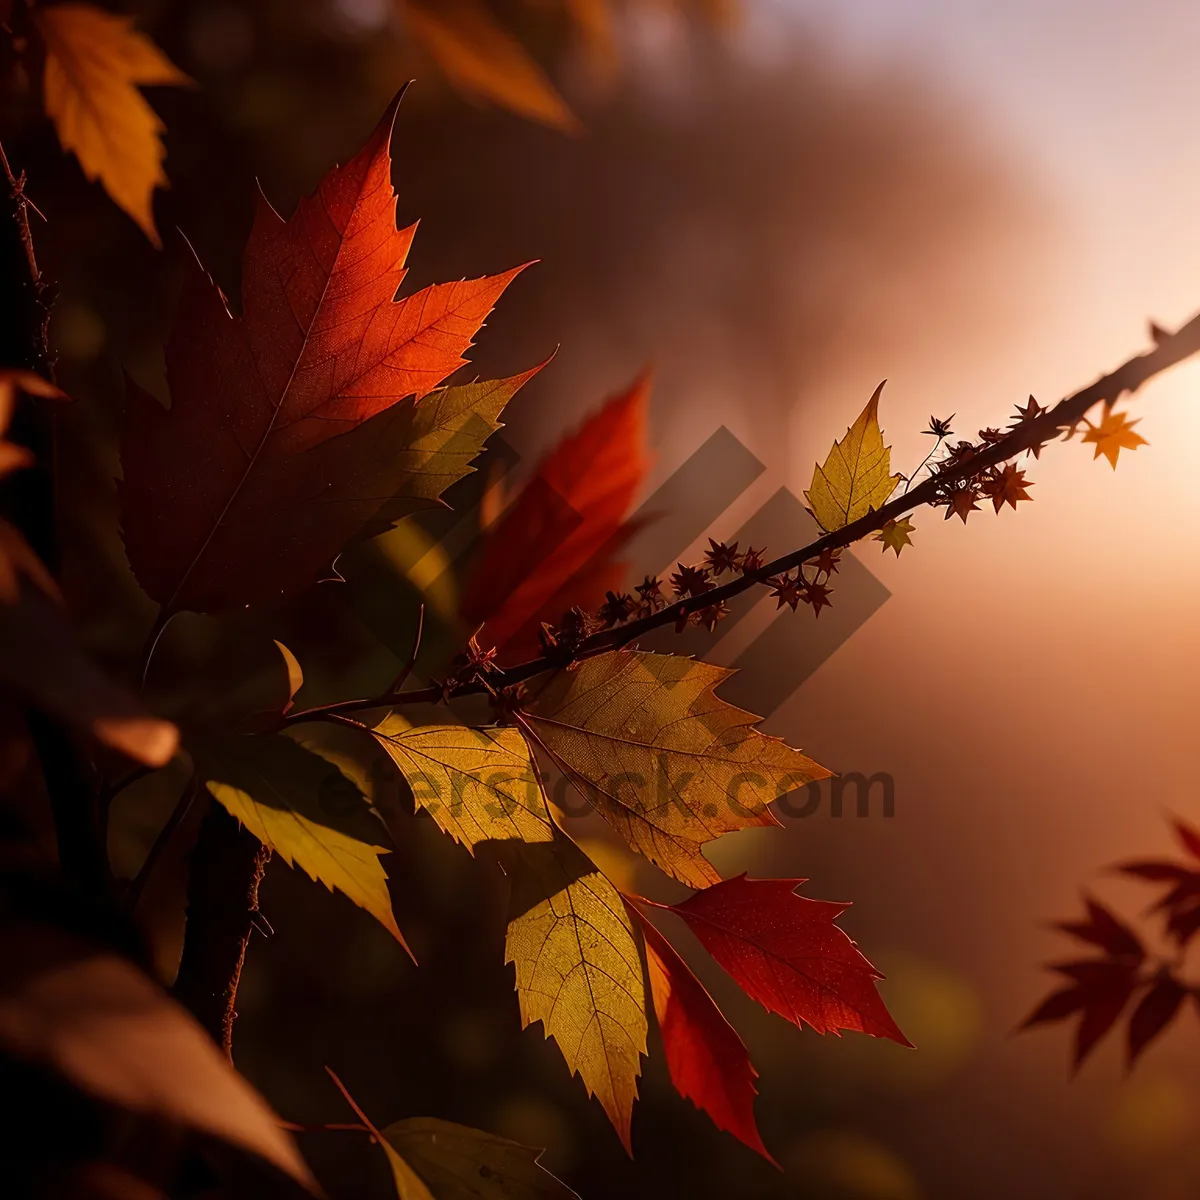 Picture of Autumn Maple Tree with Vibrant Orange Leaves